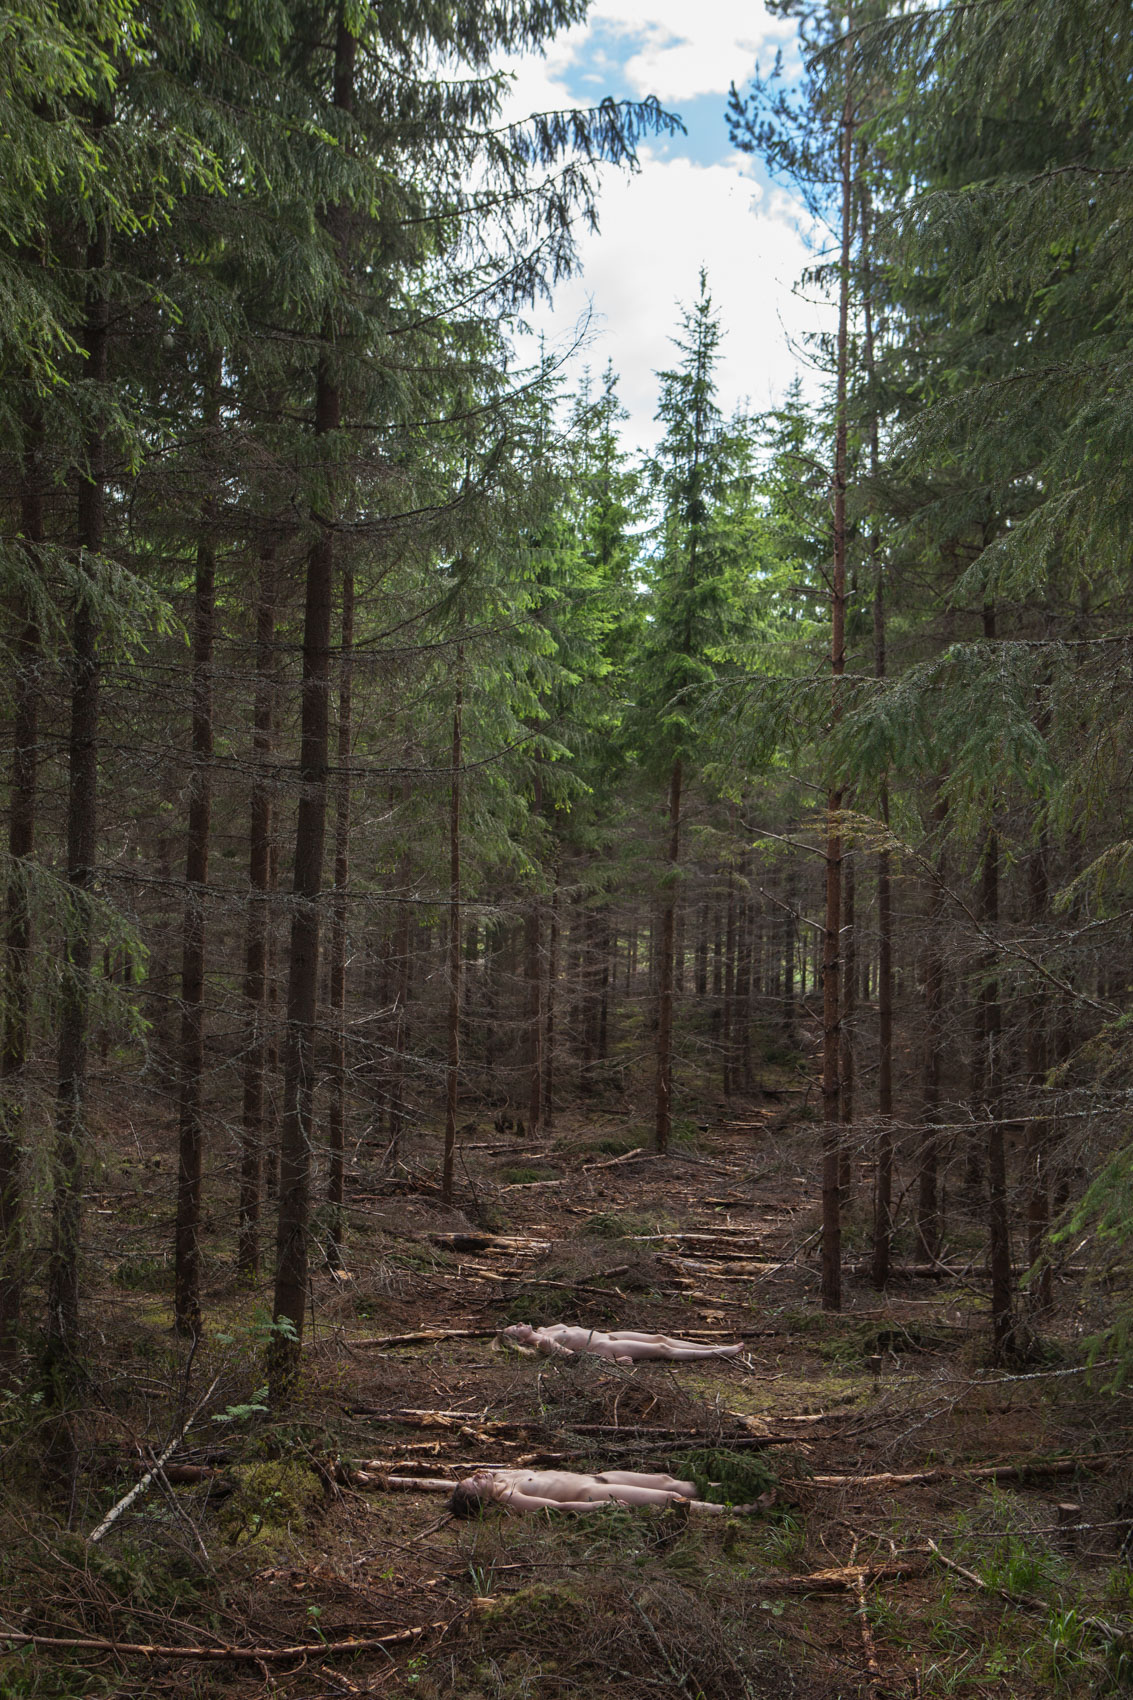 20150617_TheForestProject_MG_7155